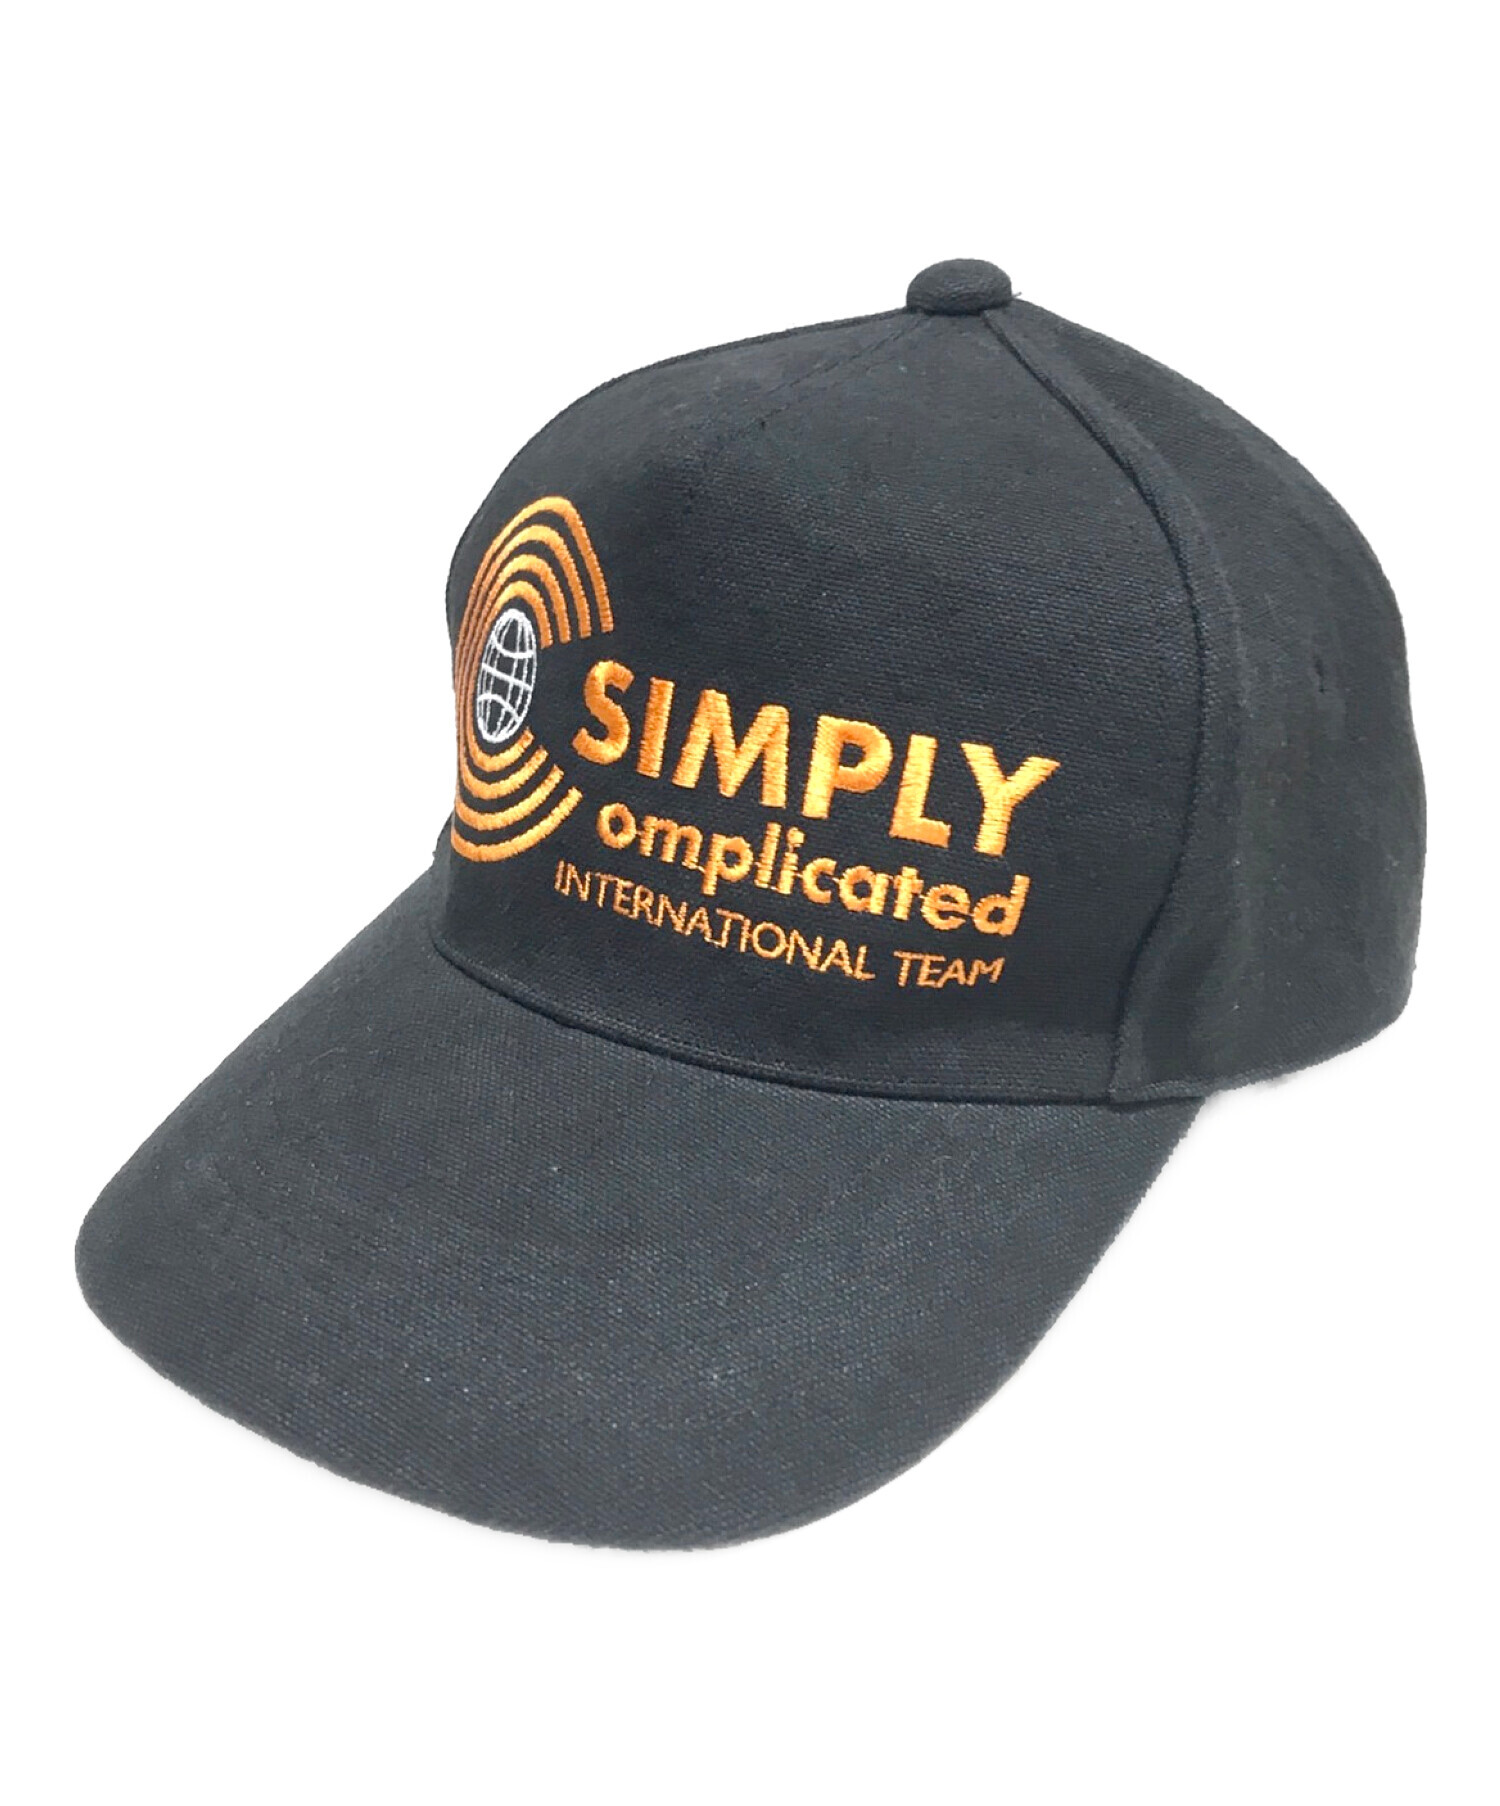 simply complicated キャップ2個セット